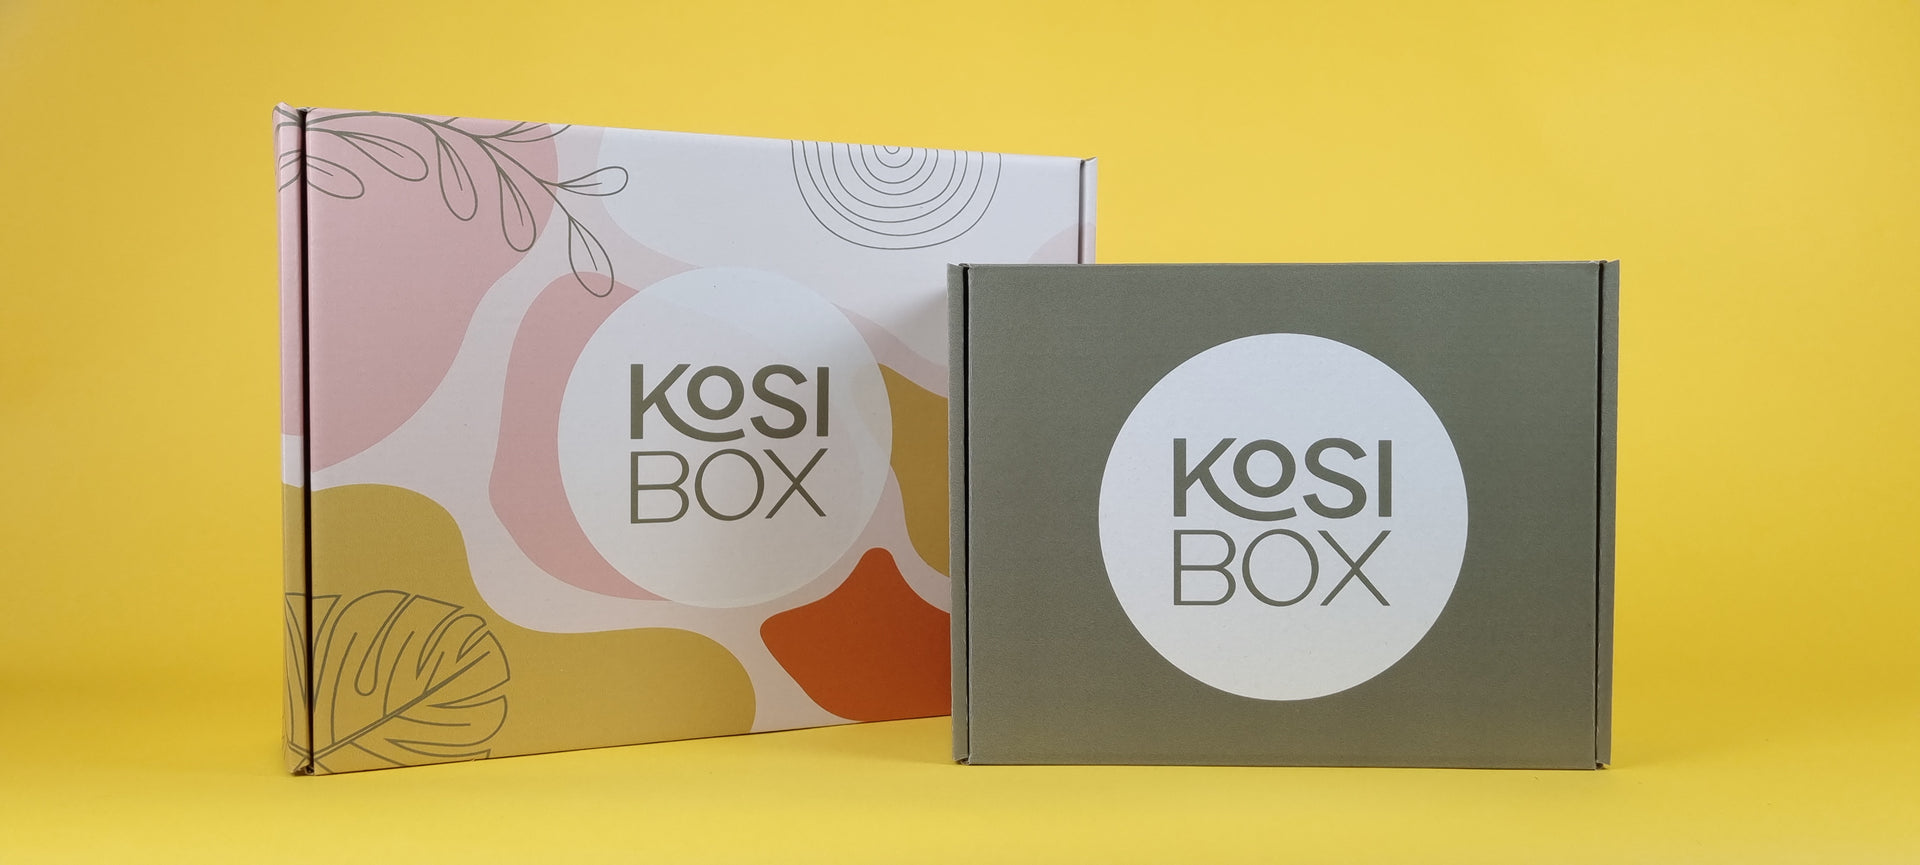 Last inn video: This video shows you the prototype of our first eco friendly kosibox giftbox